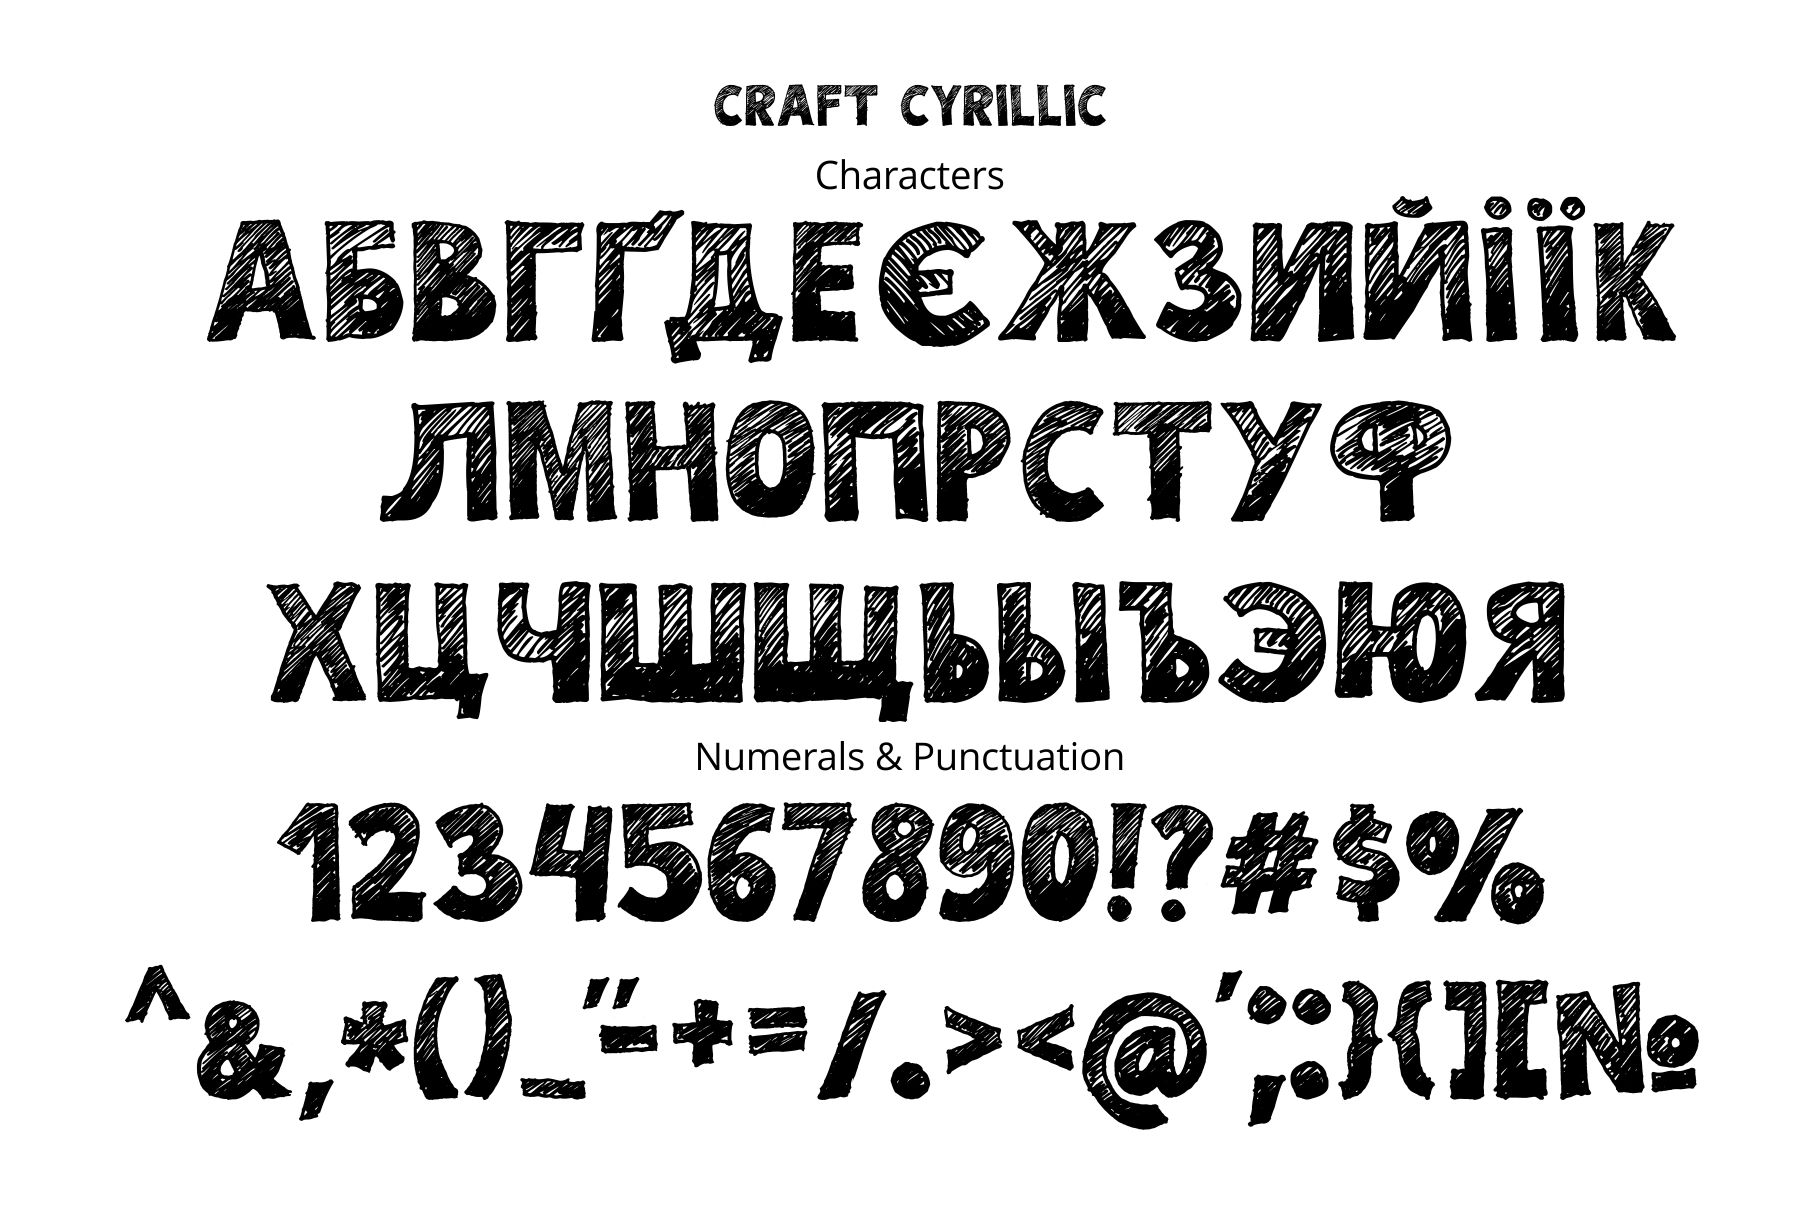 Cyrillic alphabet with numerals & punctuation.